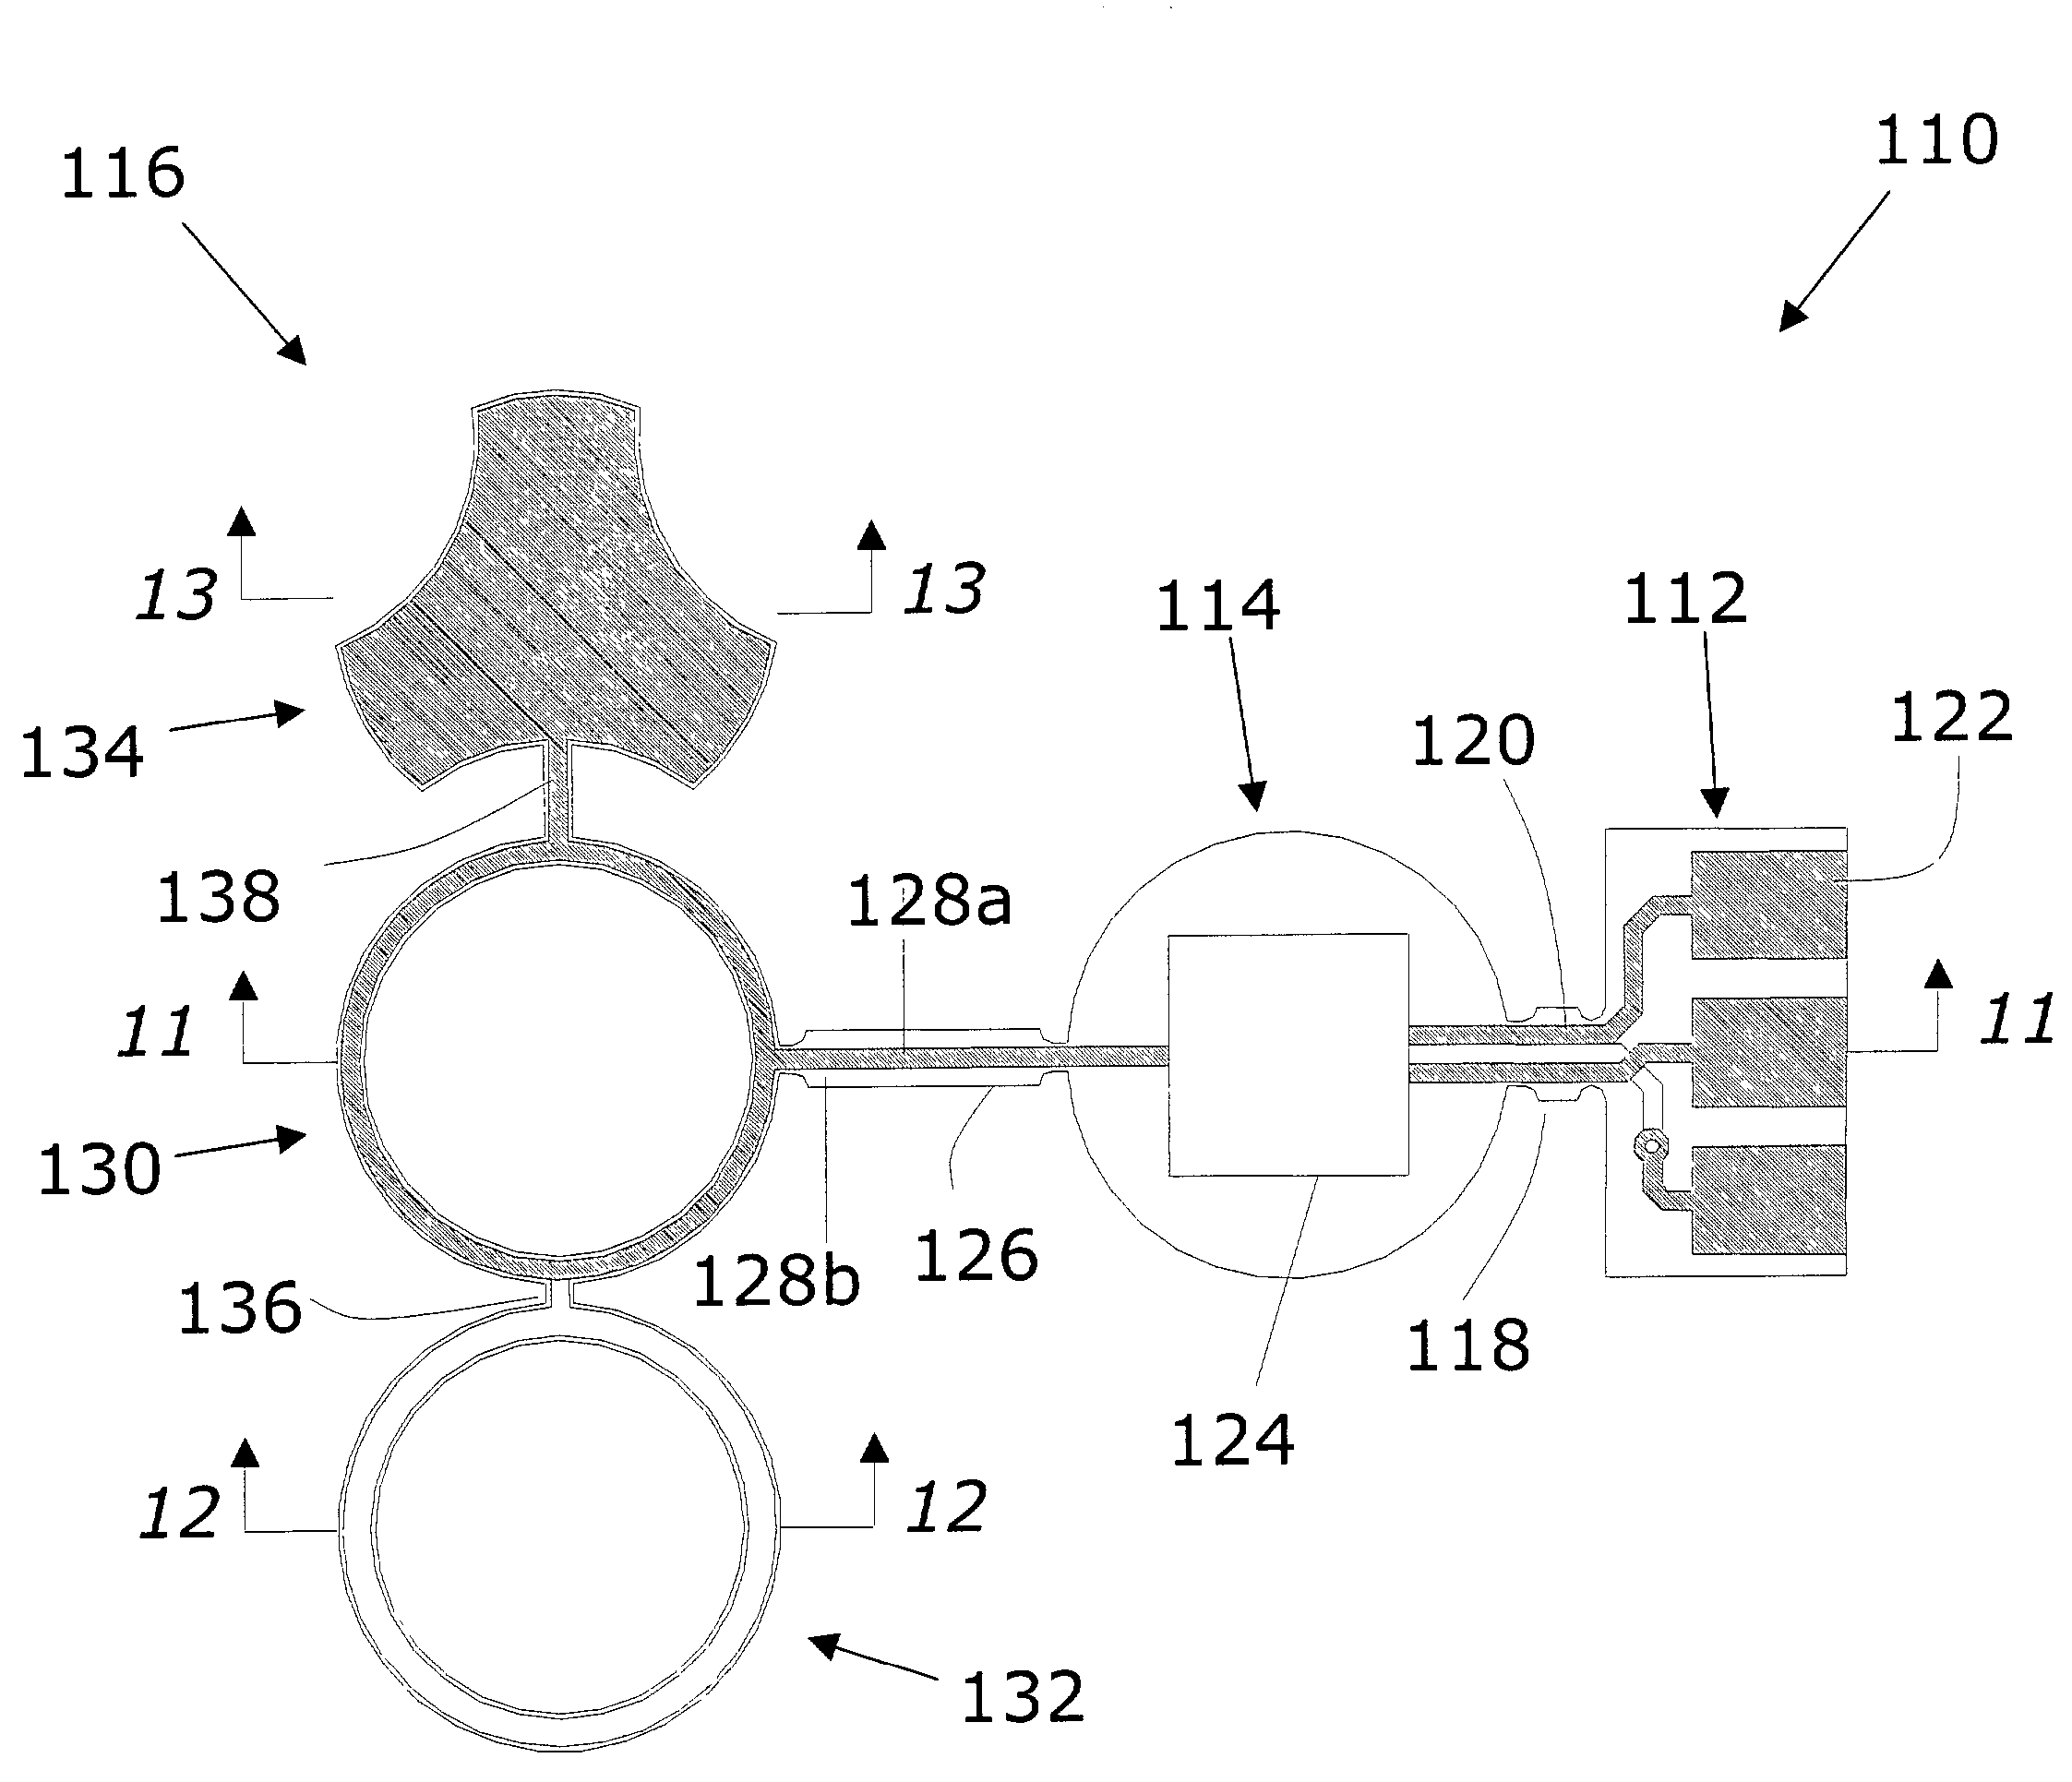 Microphone having a flexible printed circuit board for mounting components